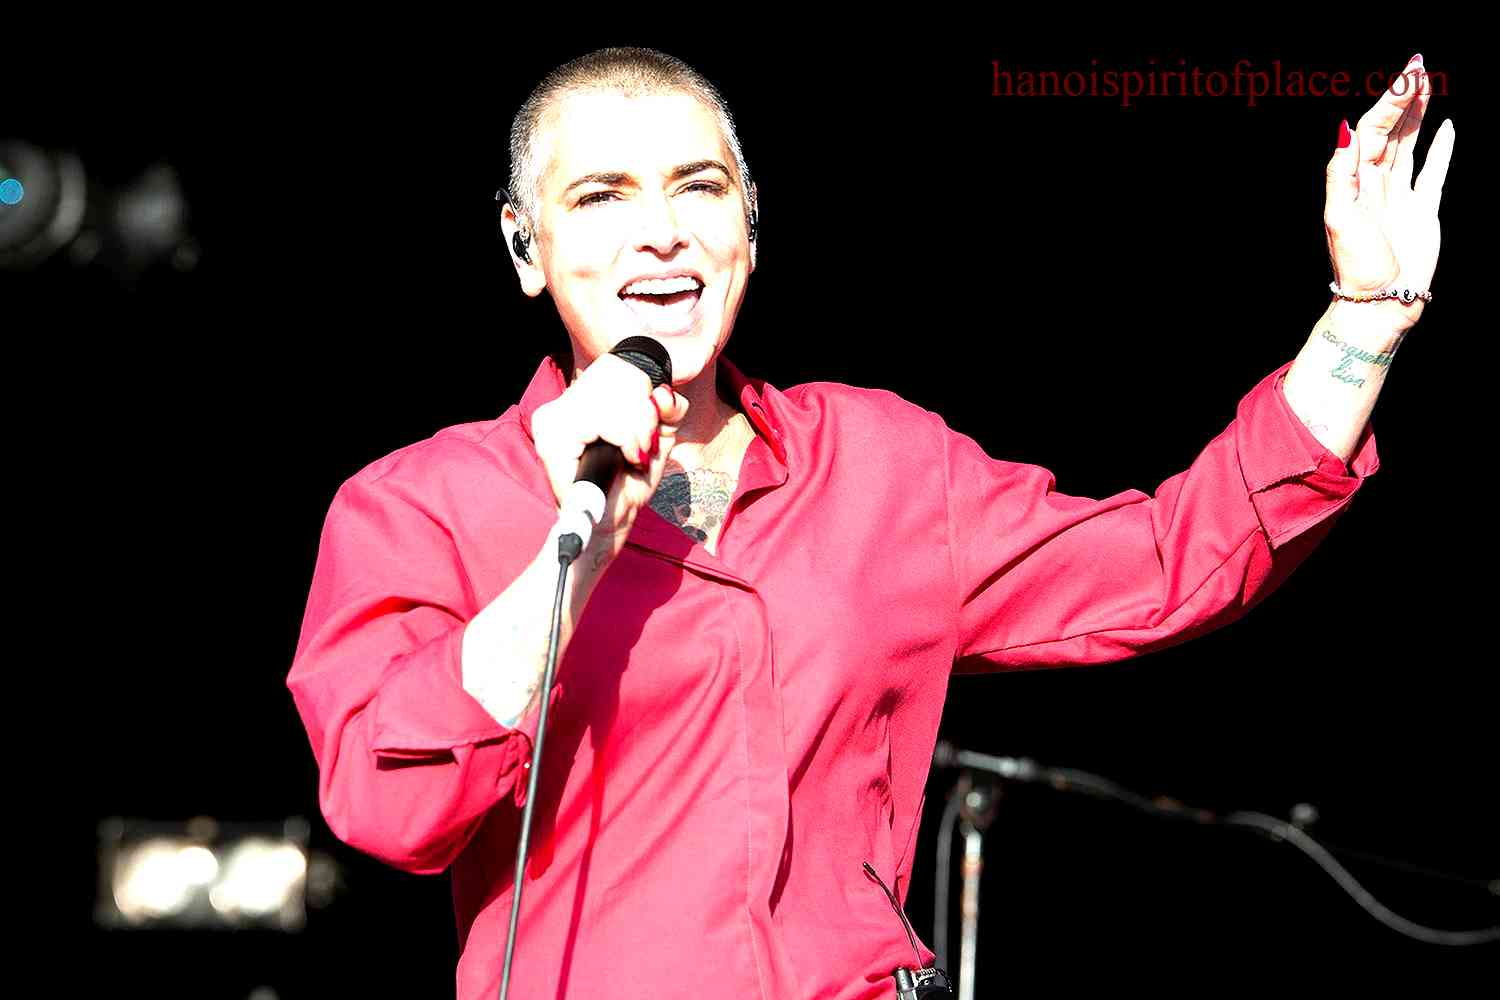 Brief overview of Sinead O'Connor's life and career